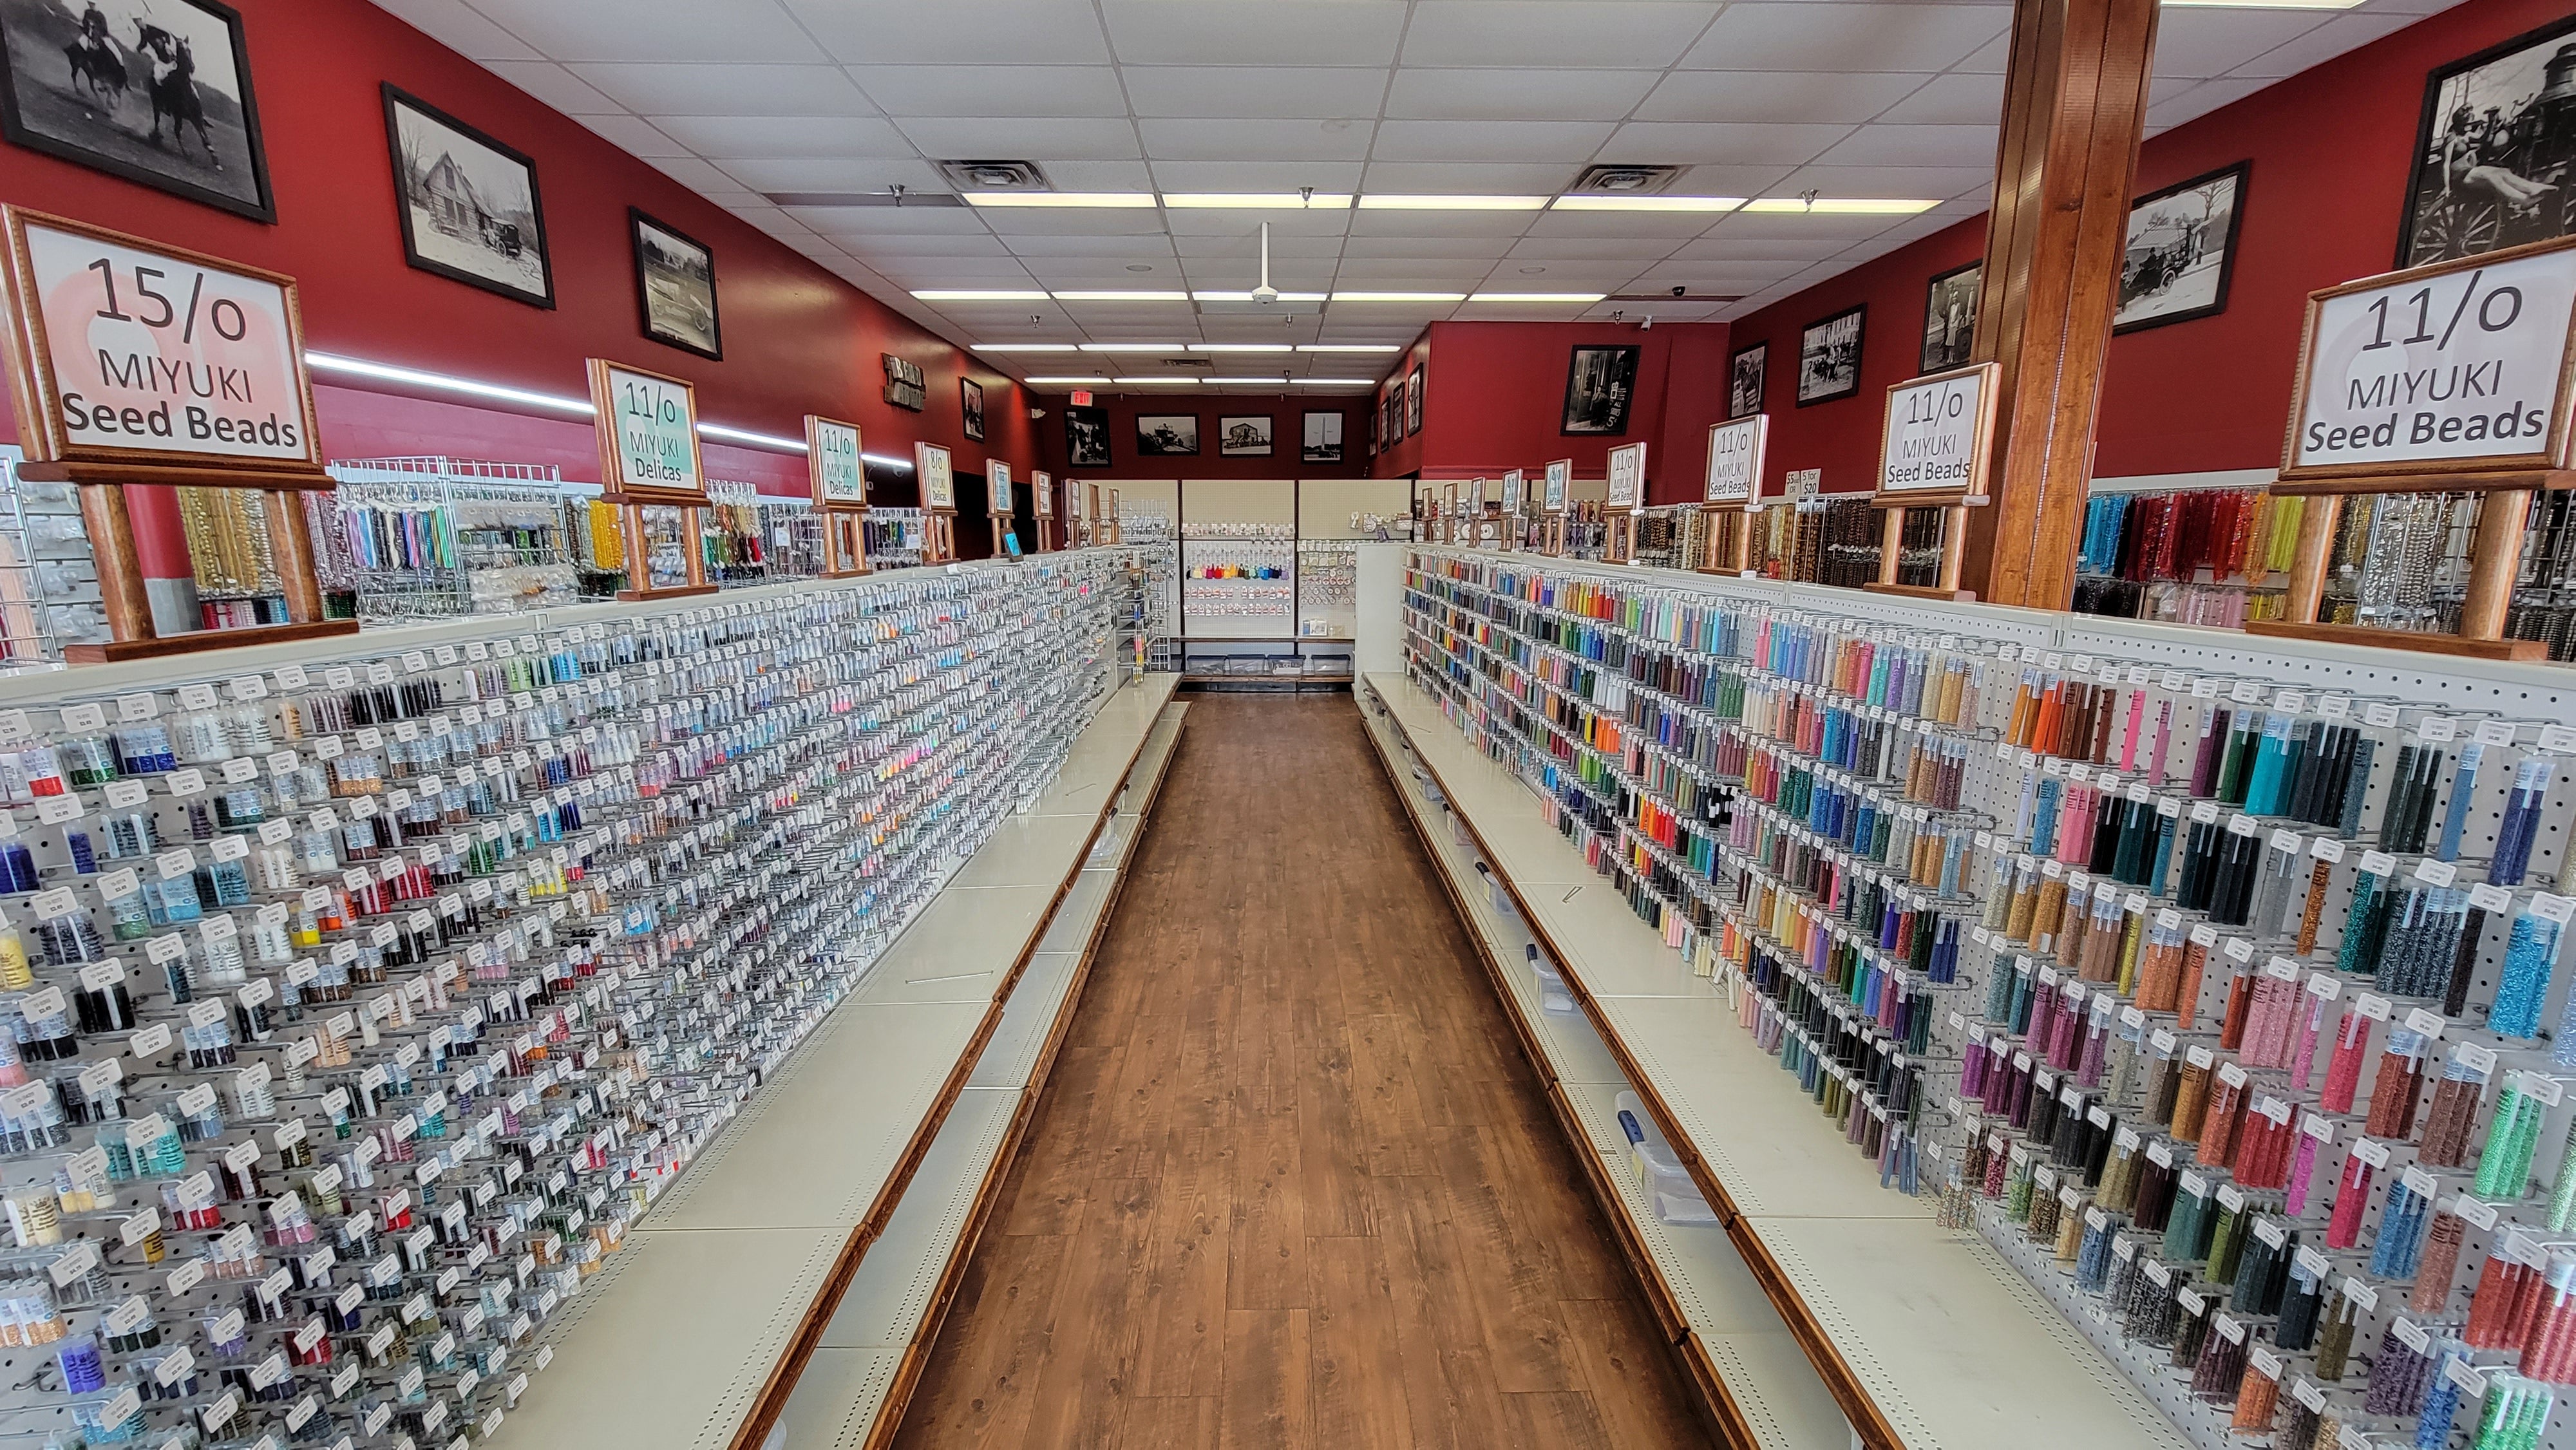 Inside view of the Bead Abode retail hobby store taken from front lobby showing main aisle of seed beads with rocailles along the right side organized by size and multi-shaped beads on the left.